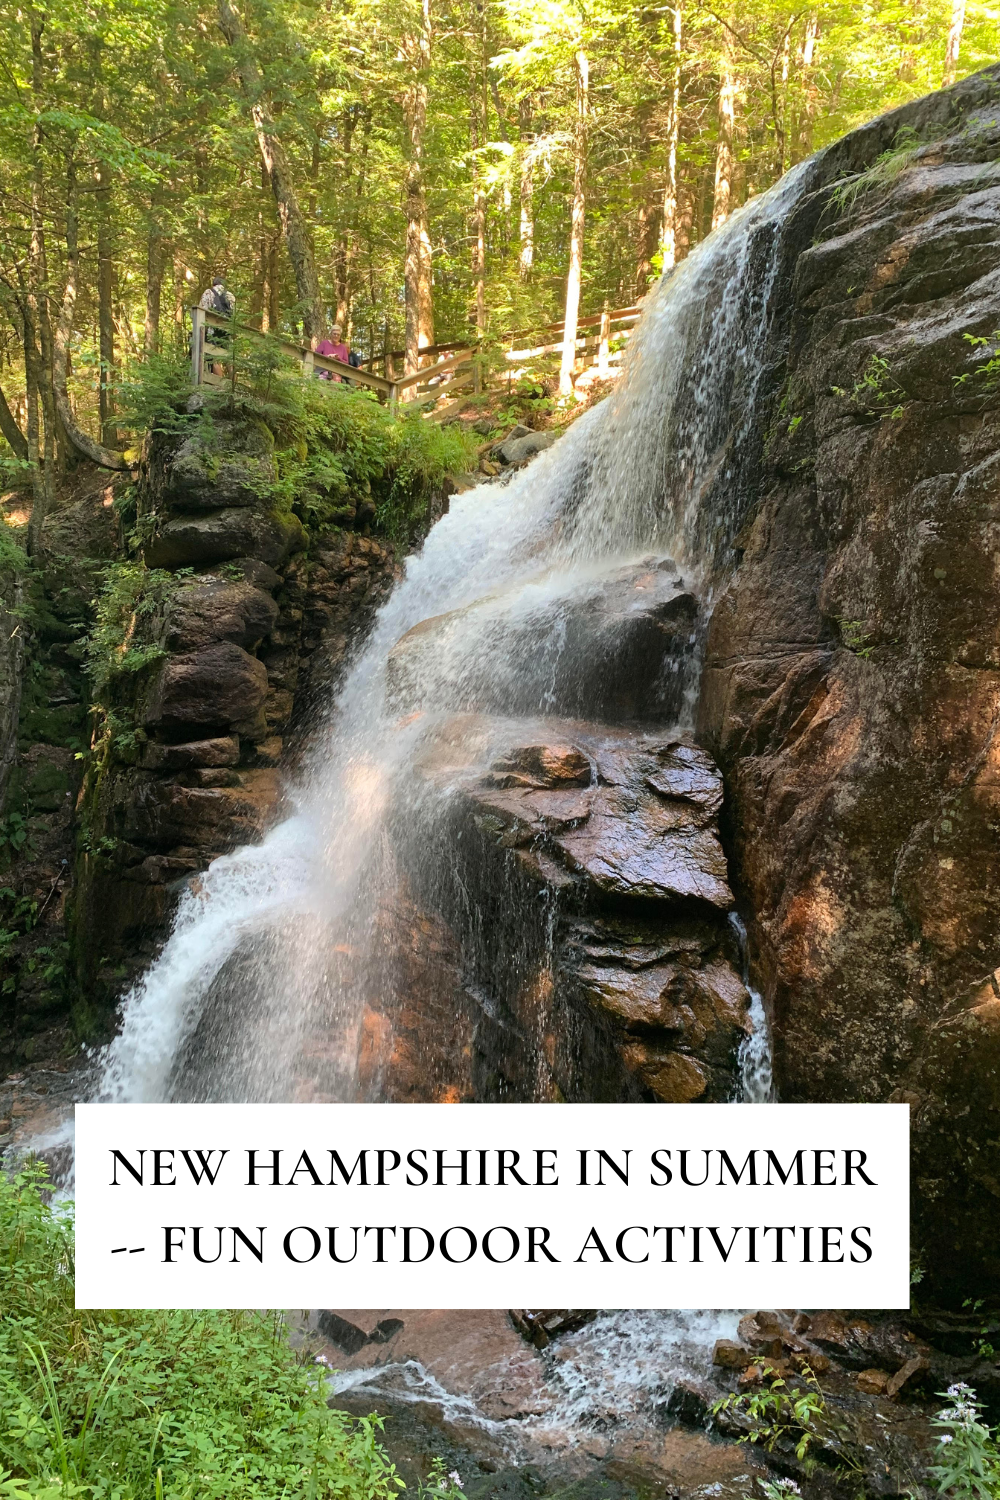 New Hampshire in summer